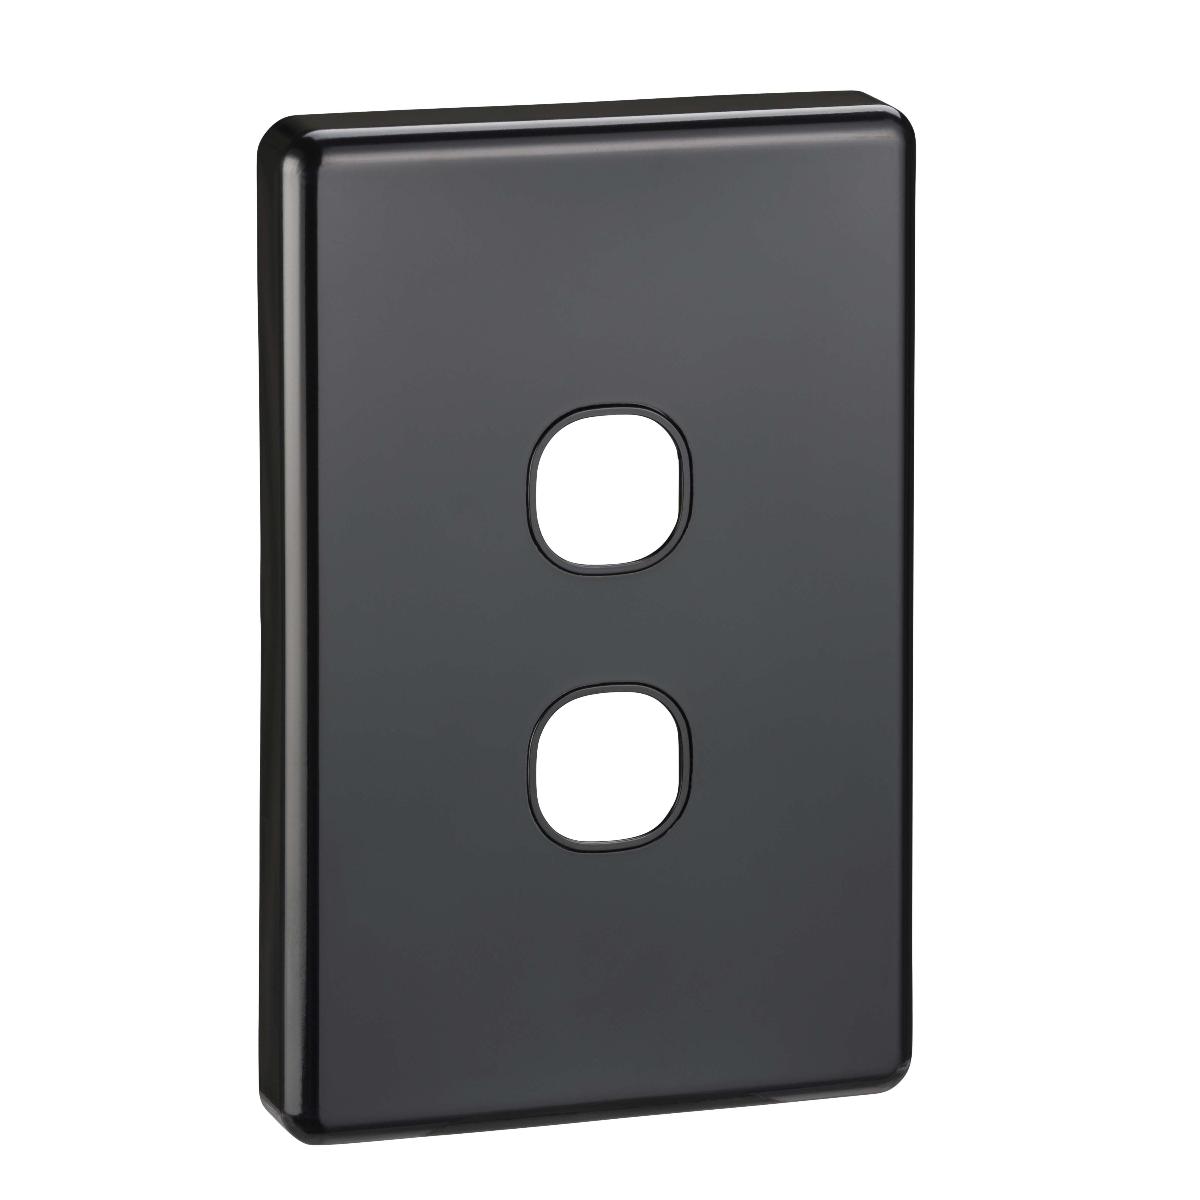 C2000 PLATE GRID & COVER 2G BLACK